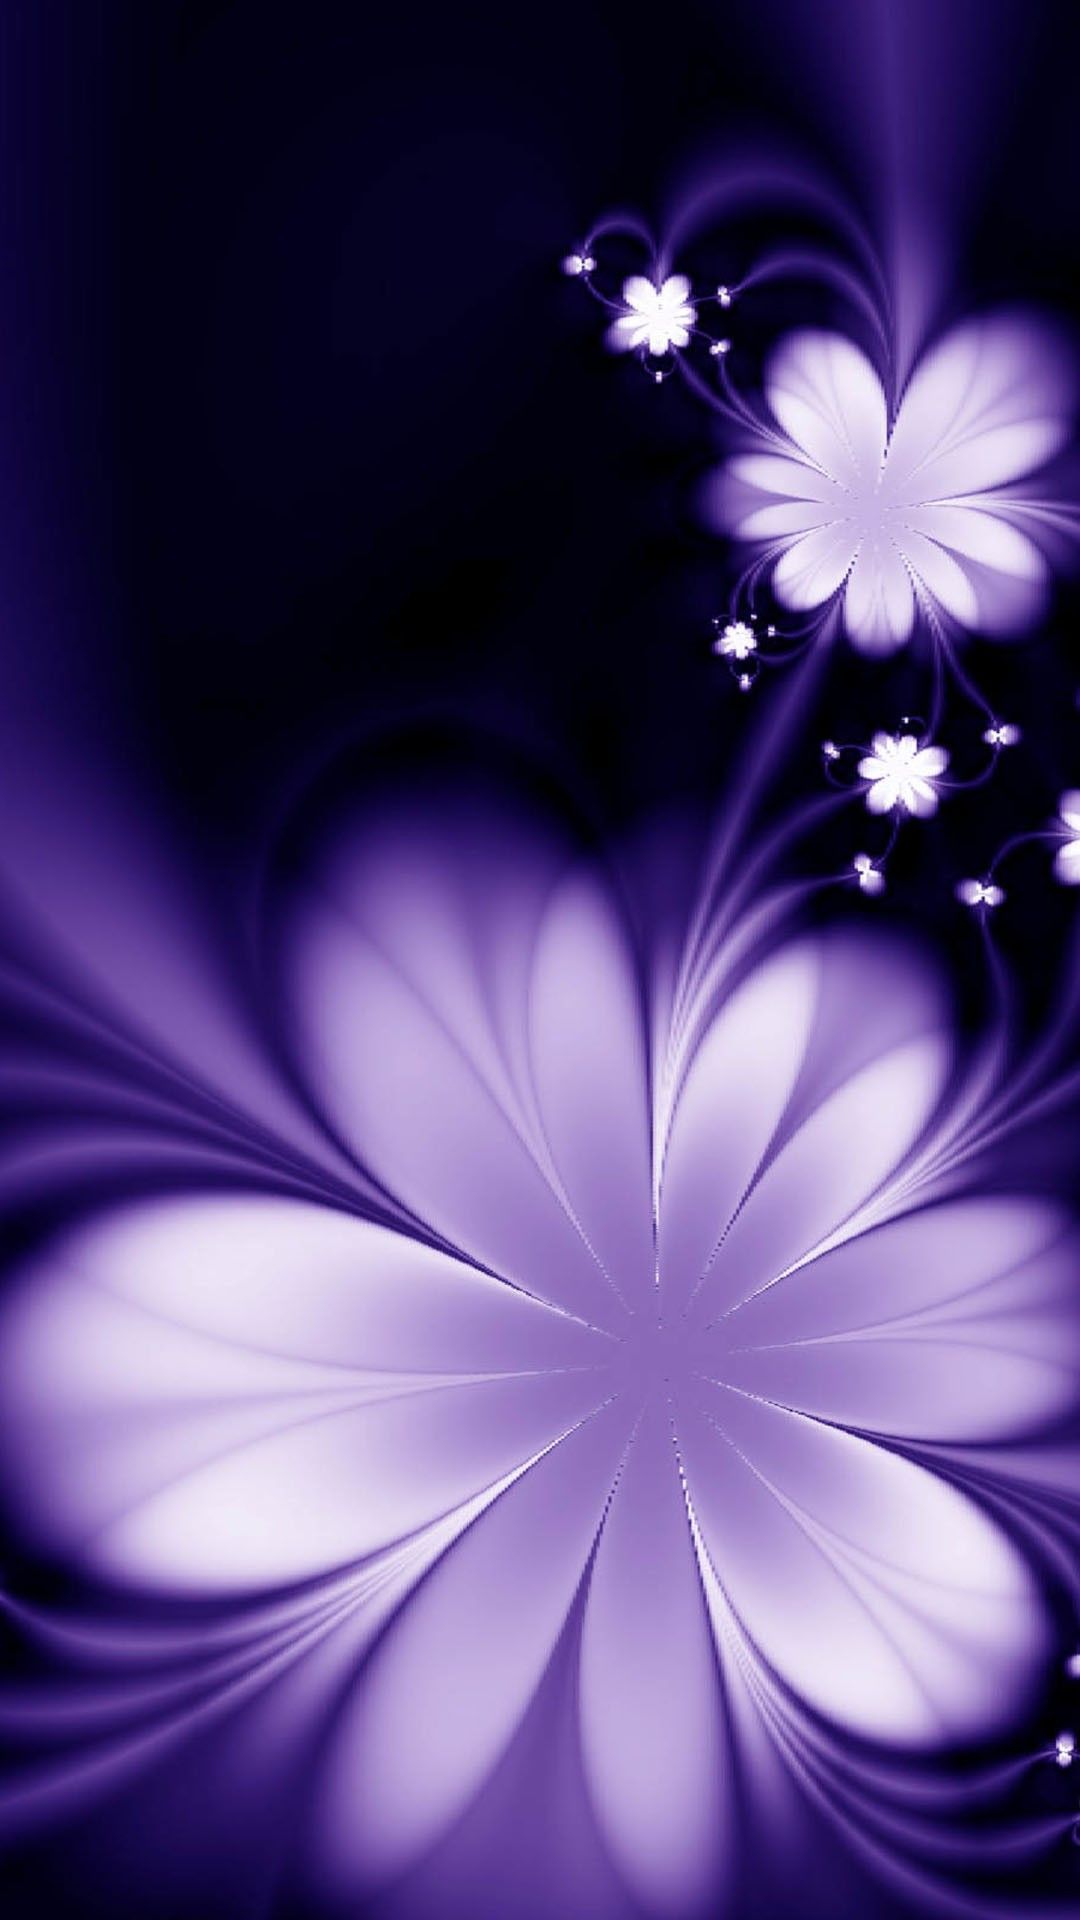 Artistic Beautiful Flower Patterns HD 1080p Mobile Background